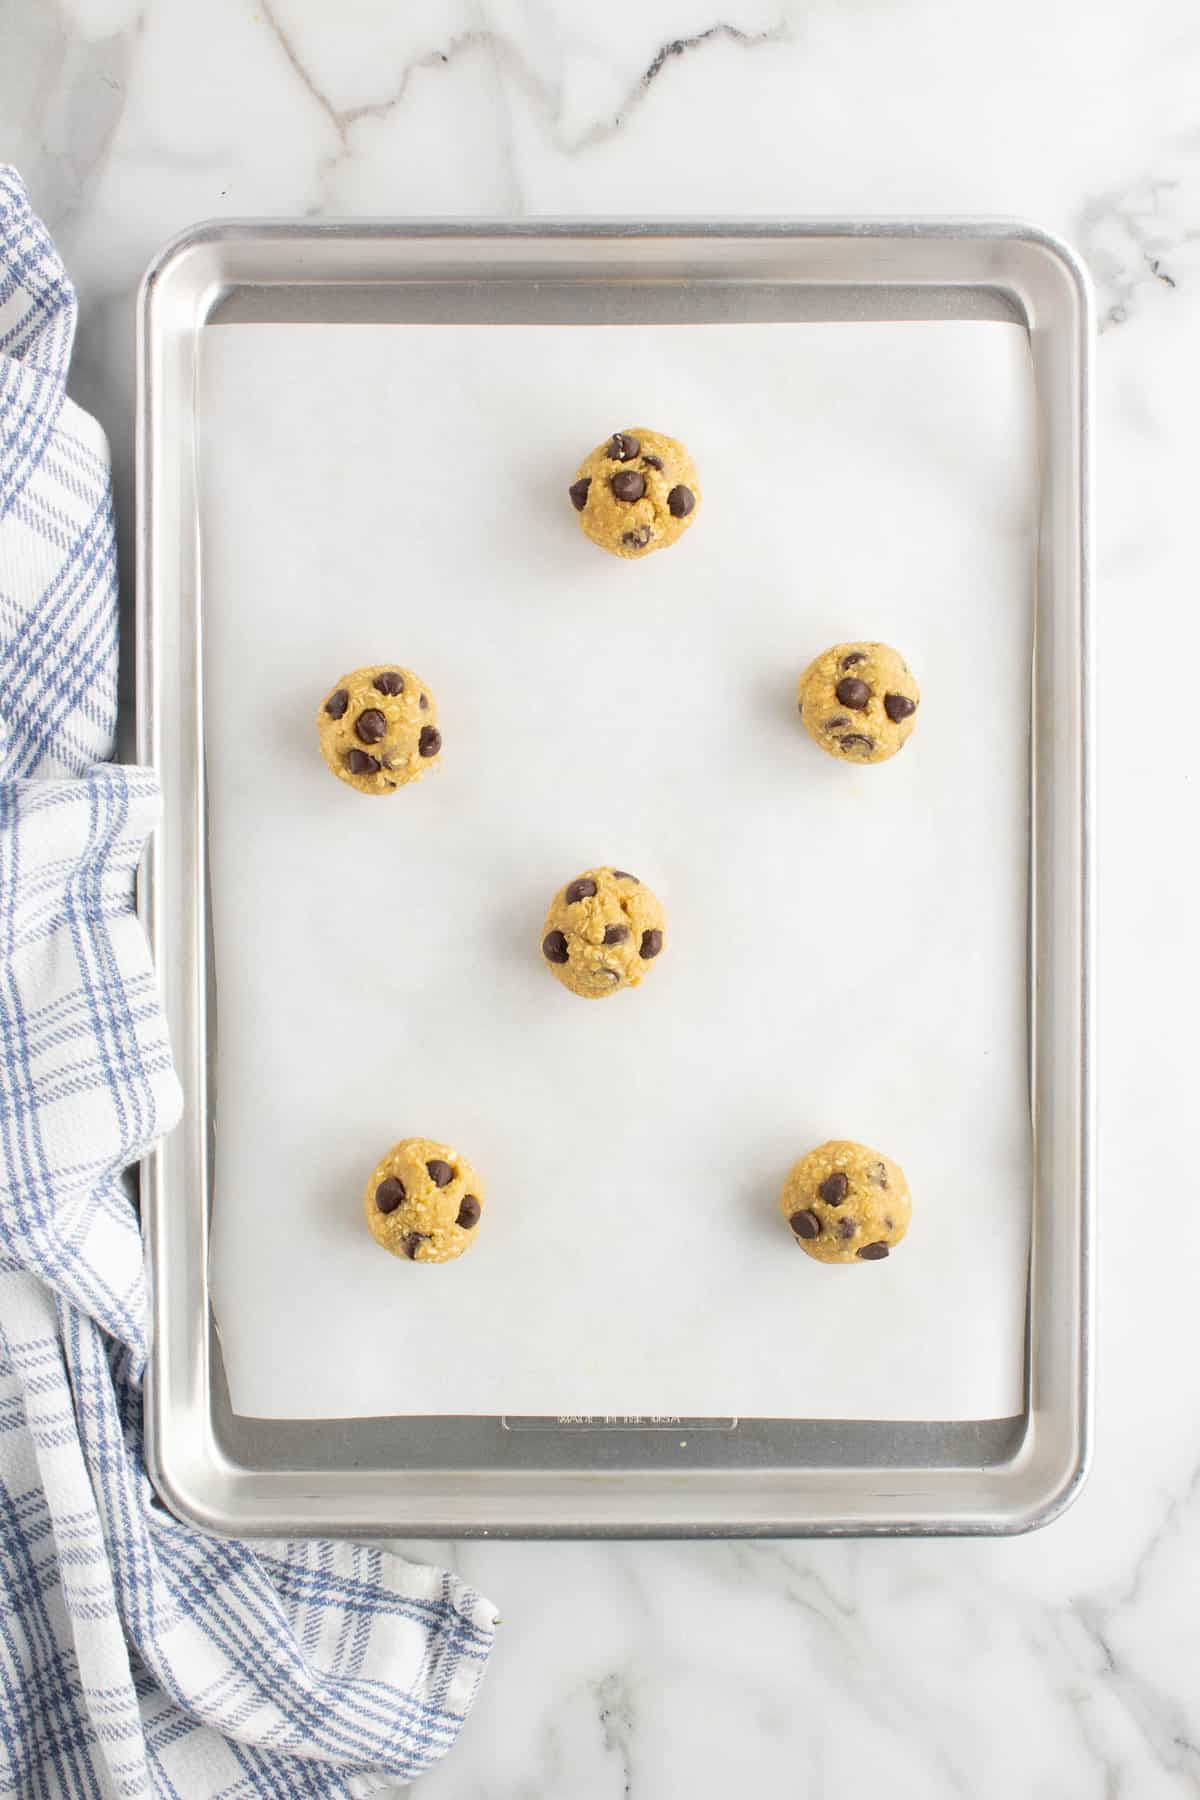 Formed Dough into Balls on Parchment Paper Lined Baking Sheet for Oatmeal Chocoloate Chip Cookie Recipe